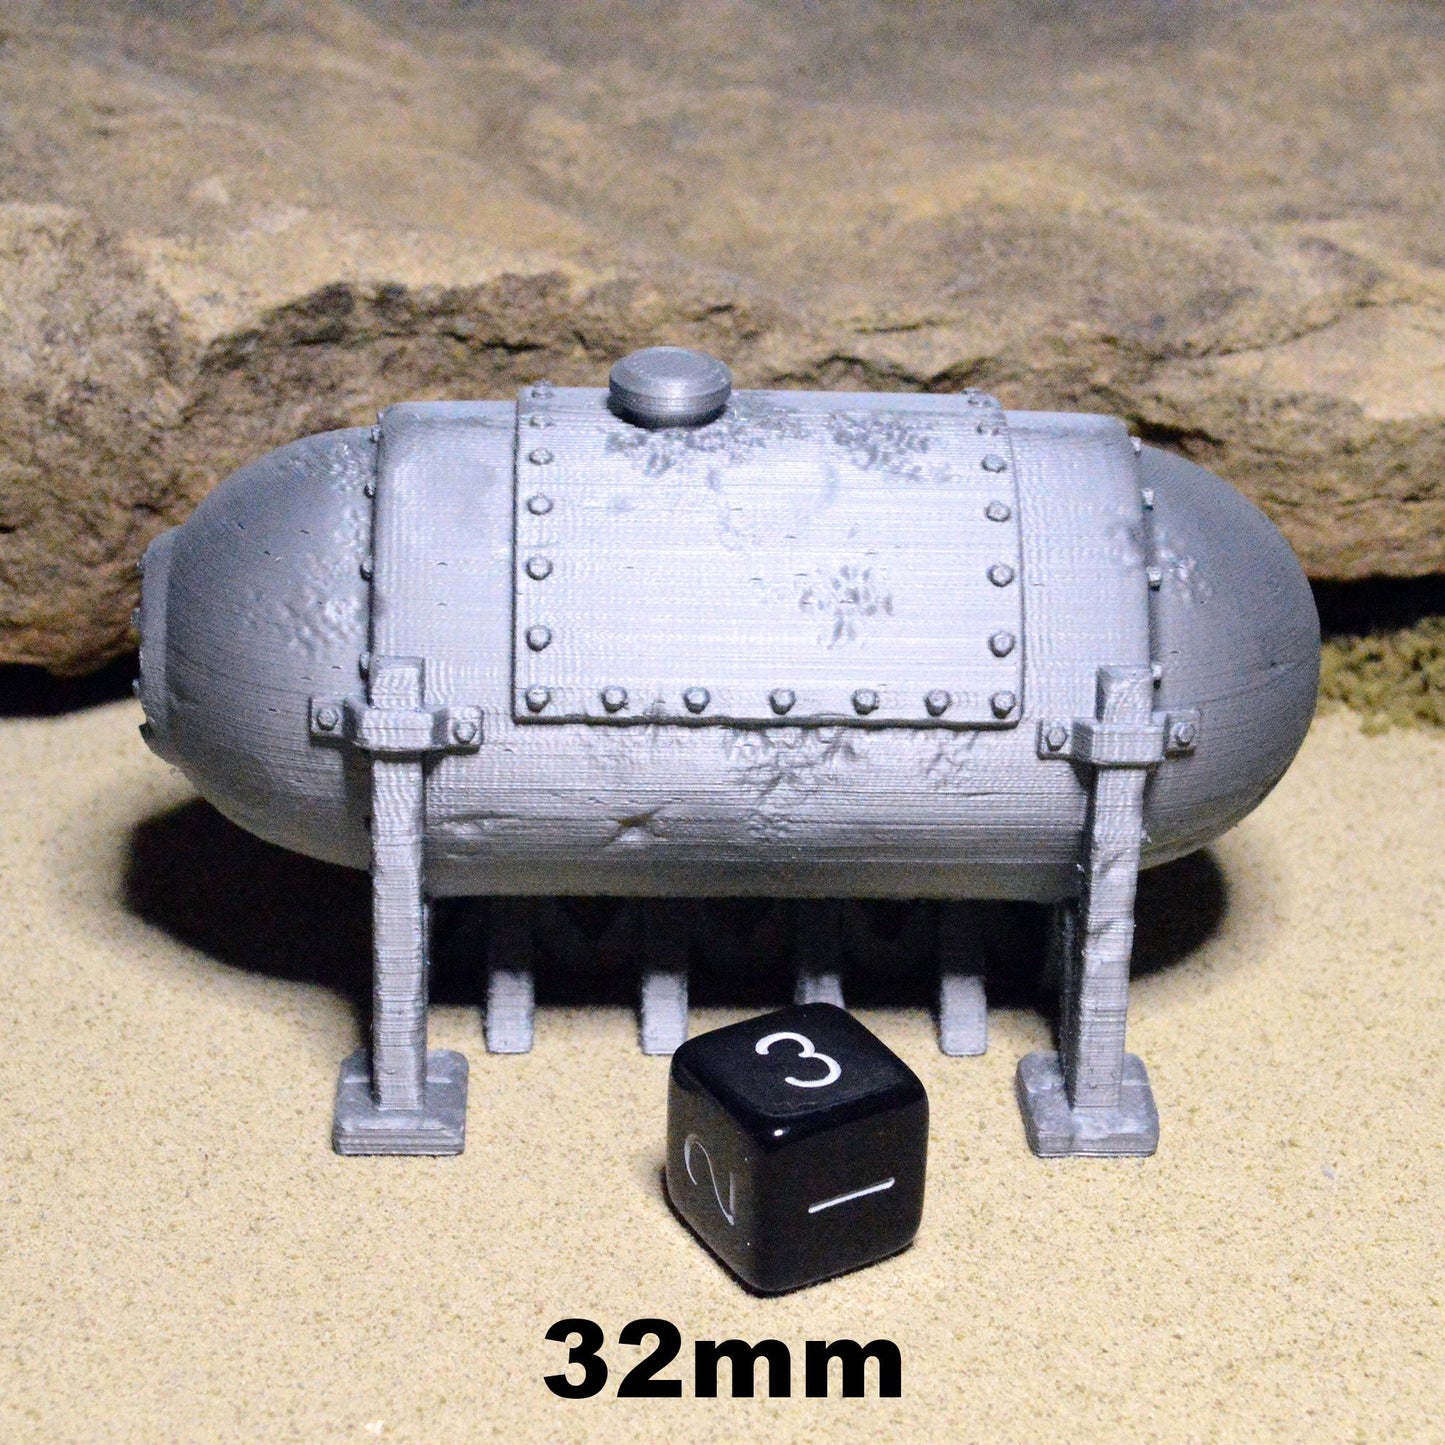 Miniature Fuel Tank for Gaslands Terrain 15mm 20mm 28mm 32mm, Gas Tank for Urban Fallout Post-Apocalyptic Scrapyard